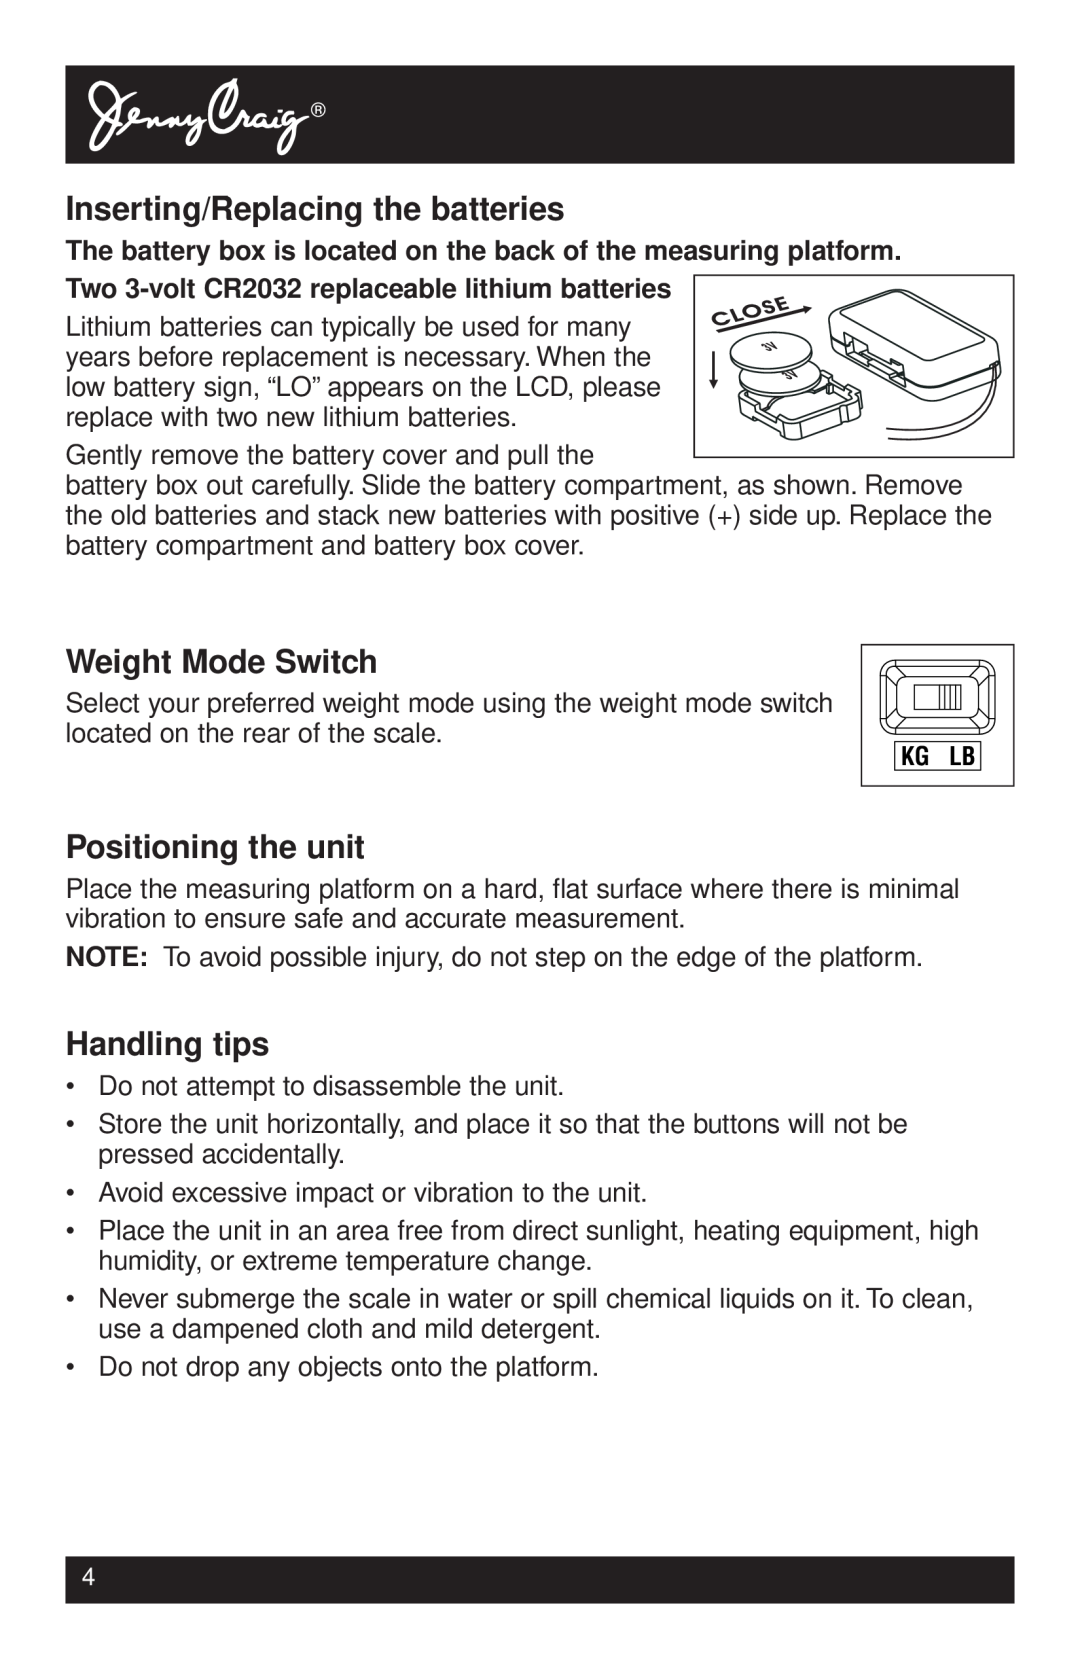 Tanita HD-338 instruction manual Inserting/Replacing the batteries, Weight Mode Switch, Positioning the unit, Handling tips 